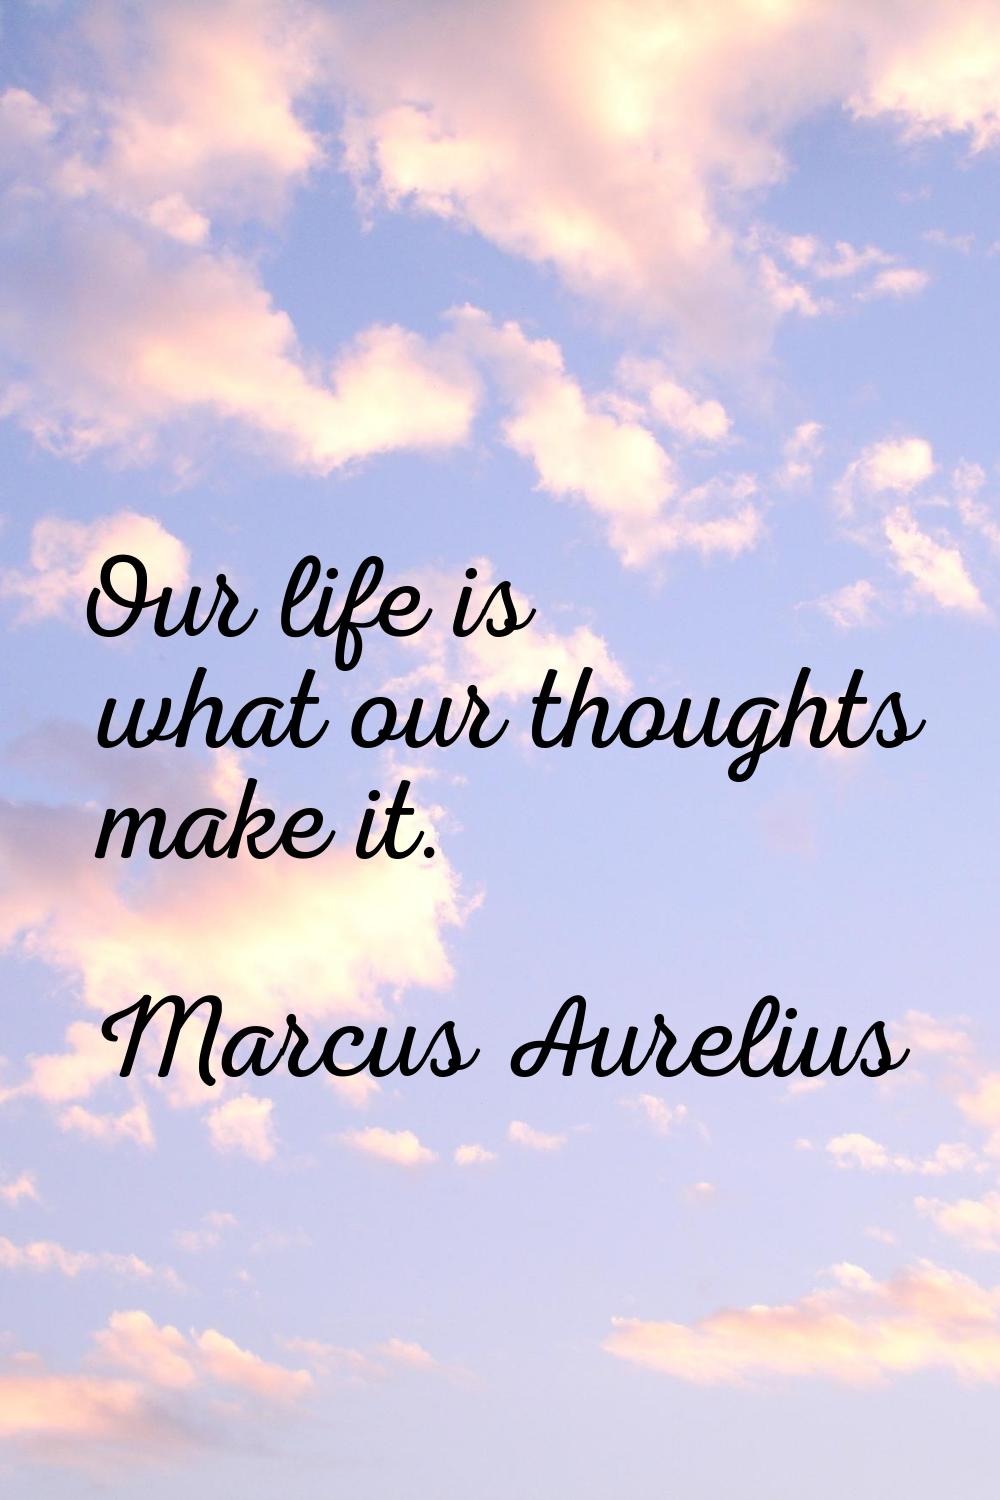 Our life is what our thoughts make it.